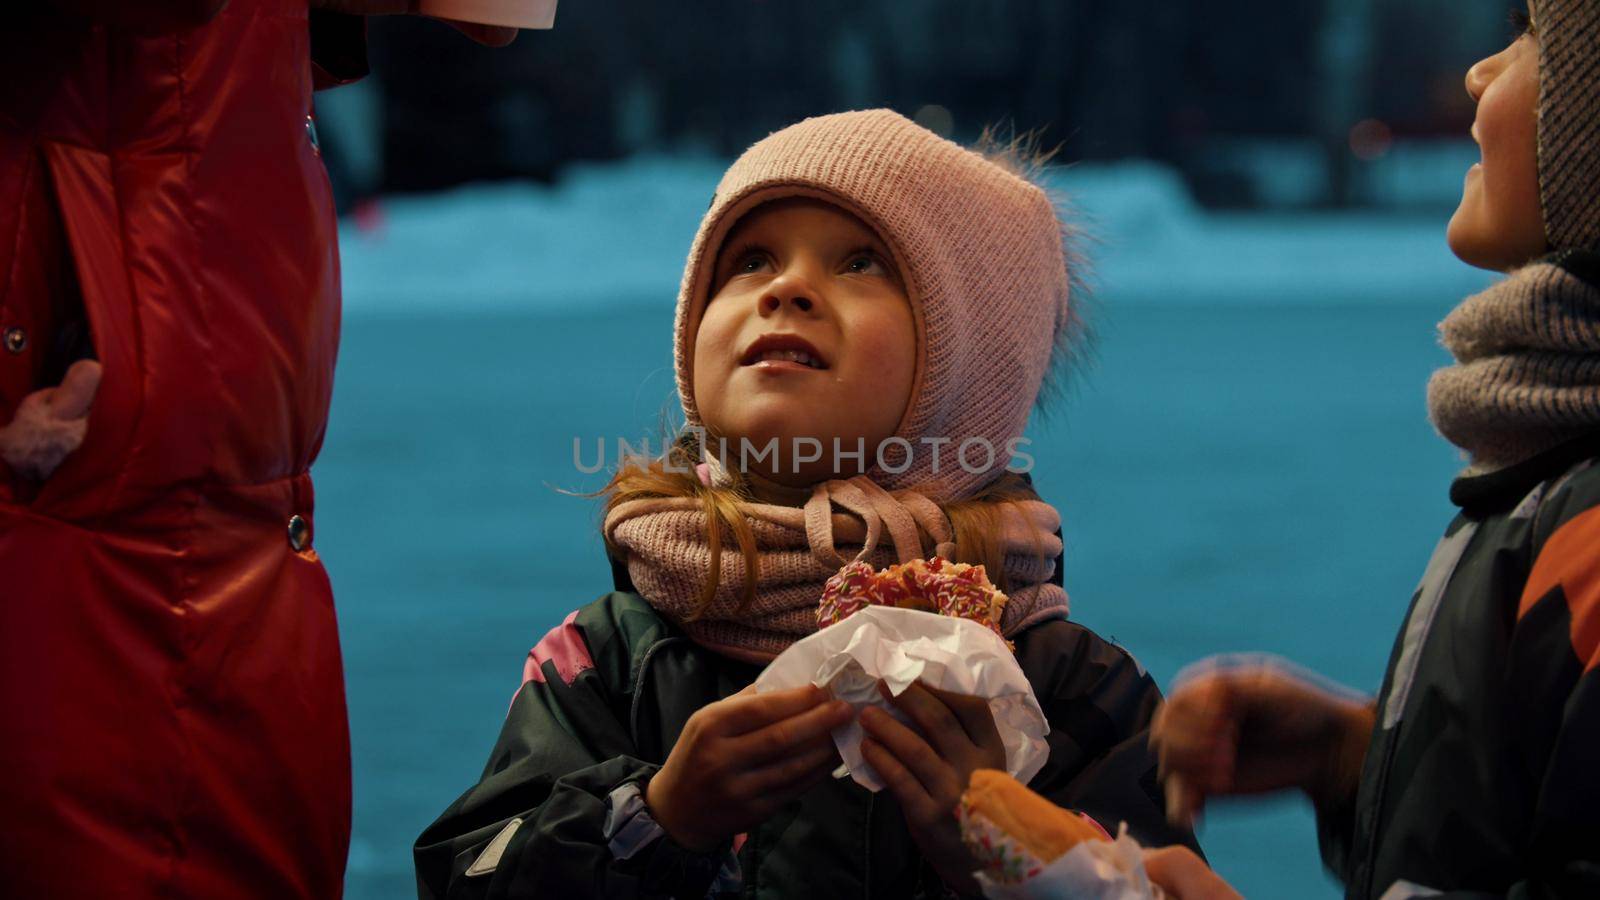 A little girl and boy eating donuts outdoors - the girl looking at her mother. Mid shot